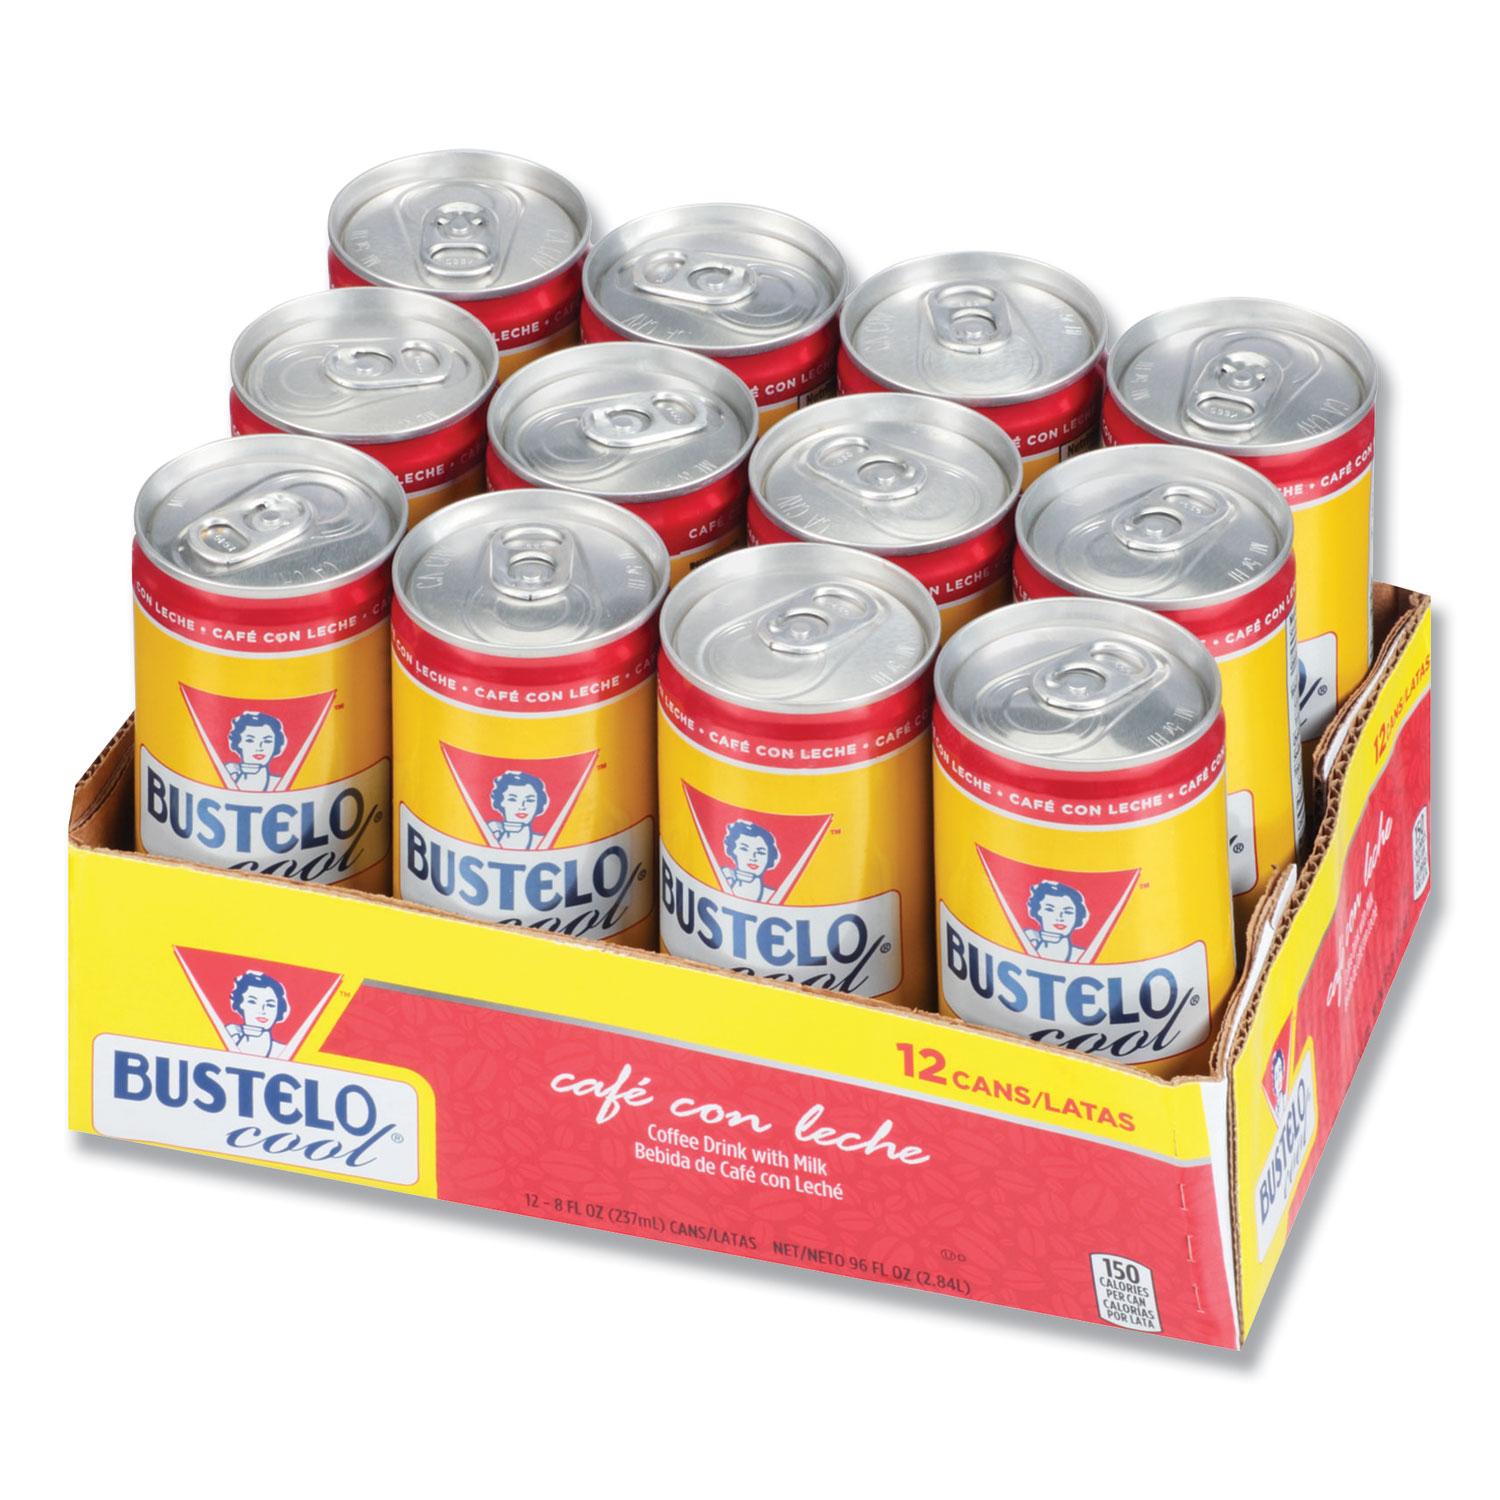  BUSTELO cool 7447101500 Ready to Drink Espresso Beverage, Classic, 8oz Can, 12/Pack (FOL01500) 